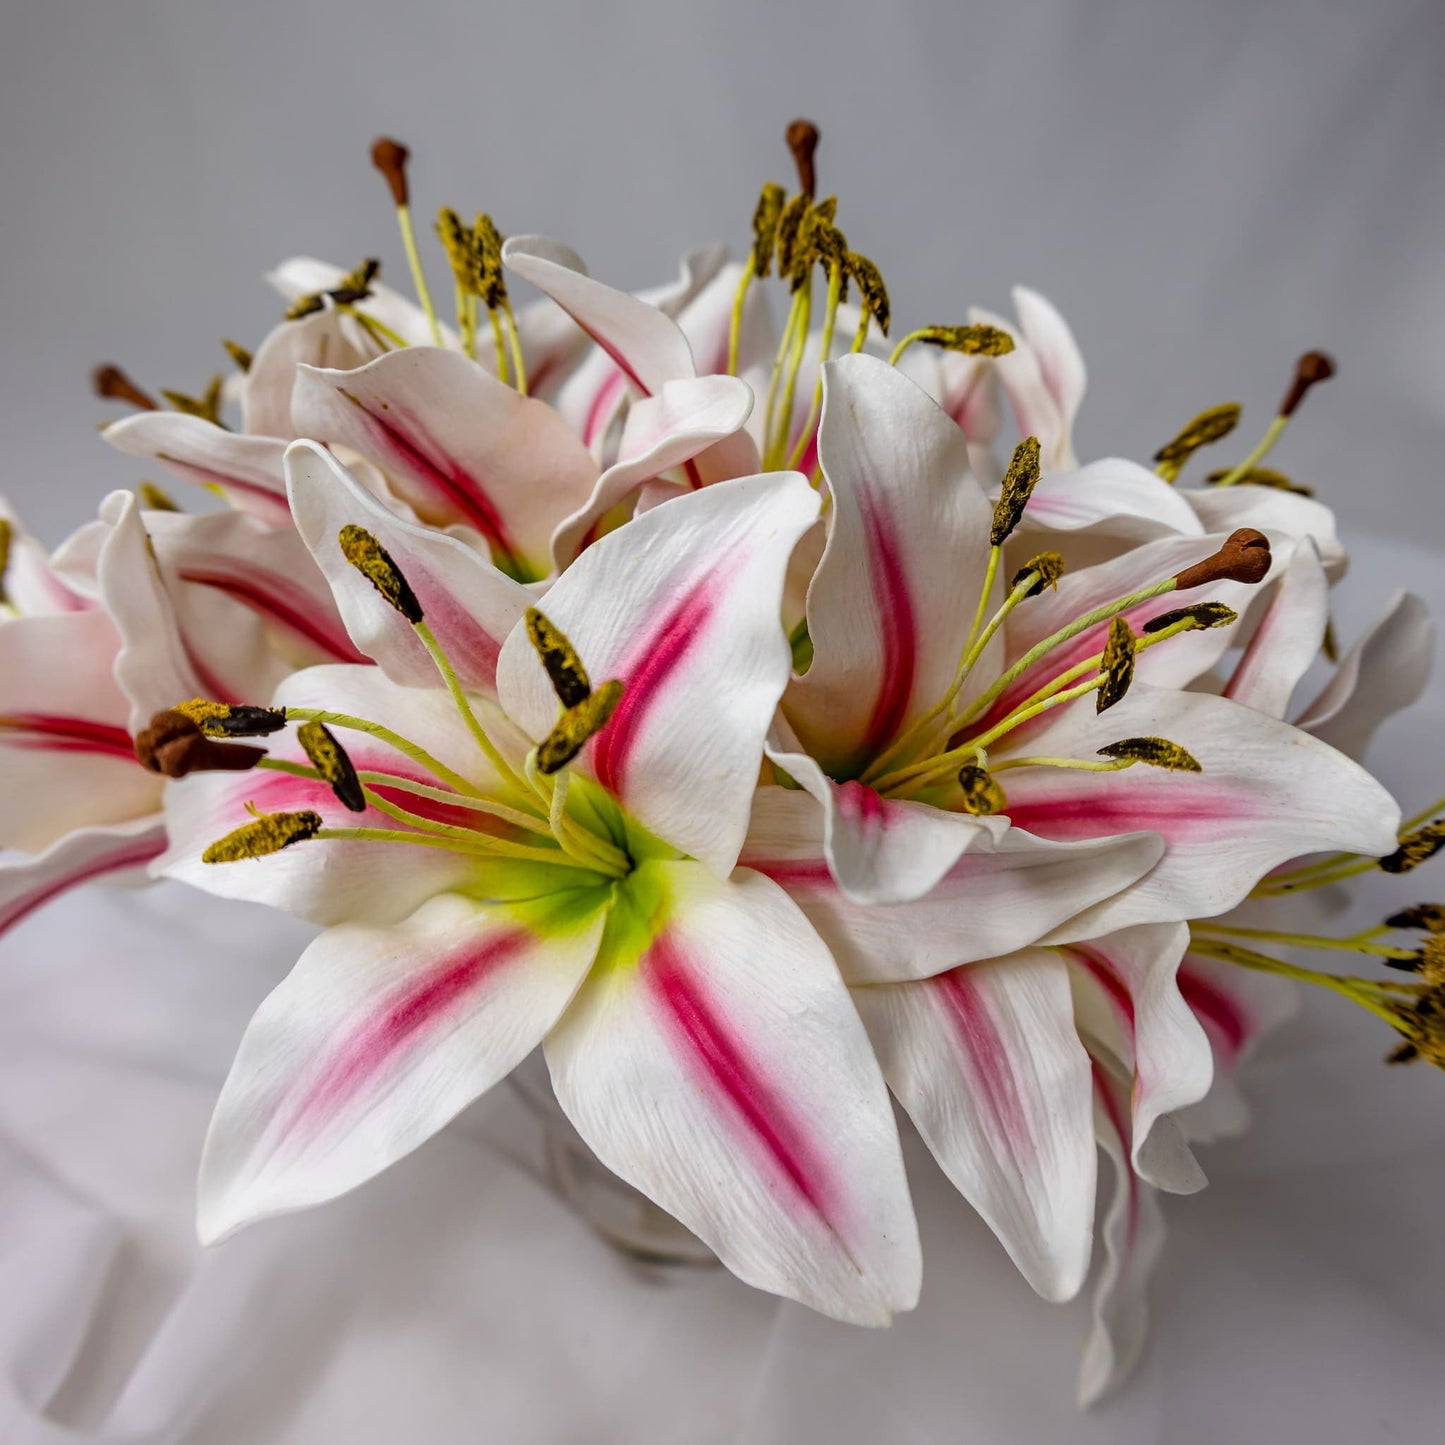 artificial White/Pink Stripe Asiatic Lily Flowerhead in glass vase